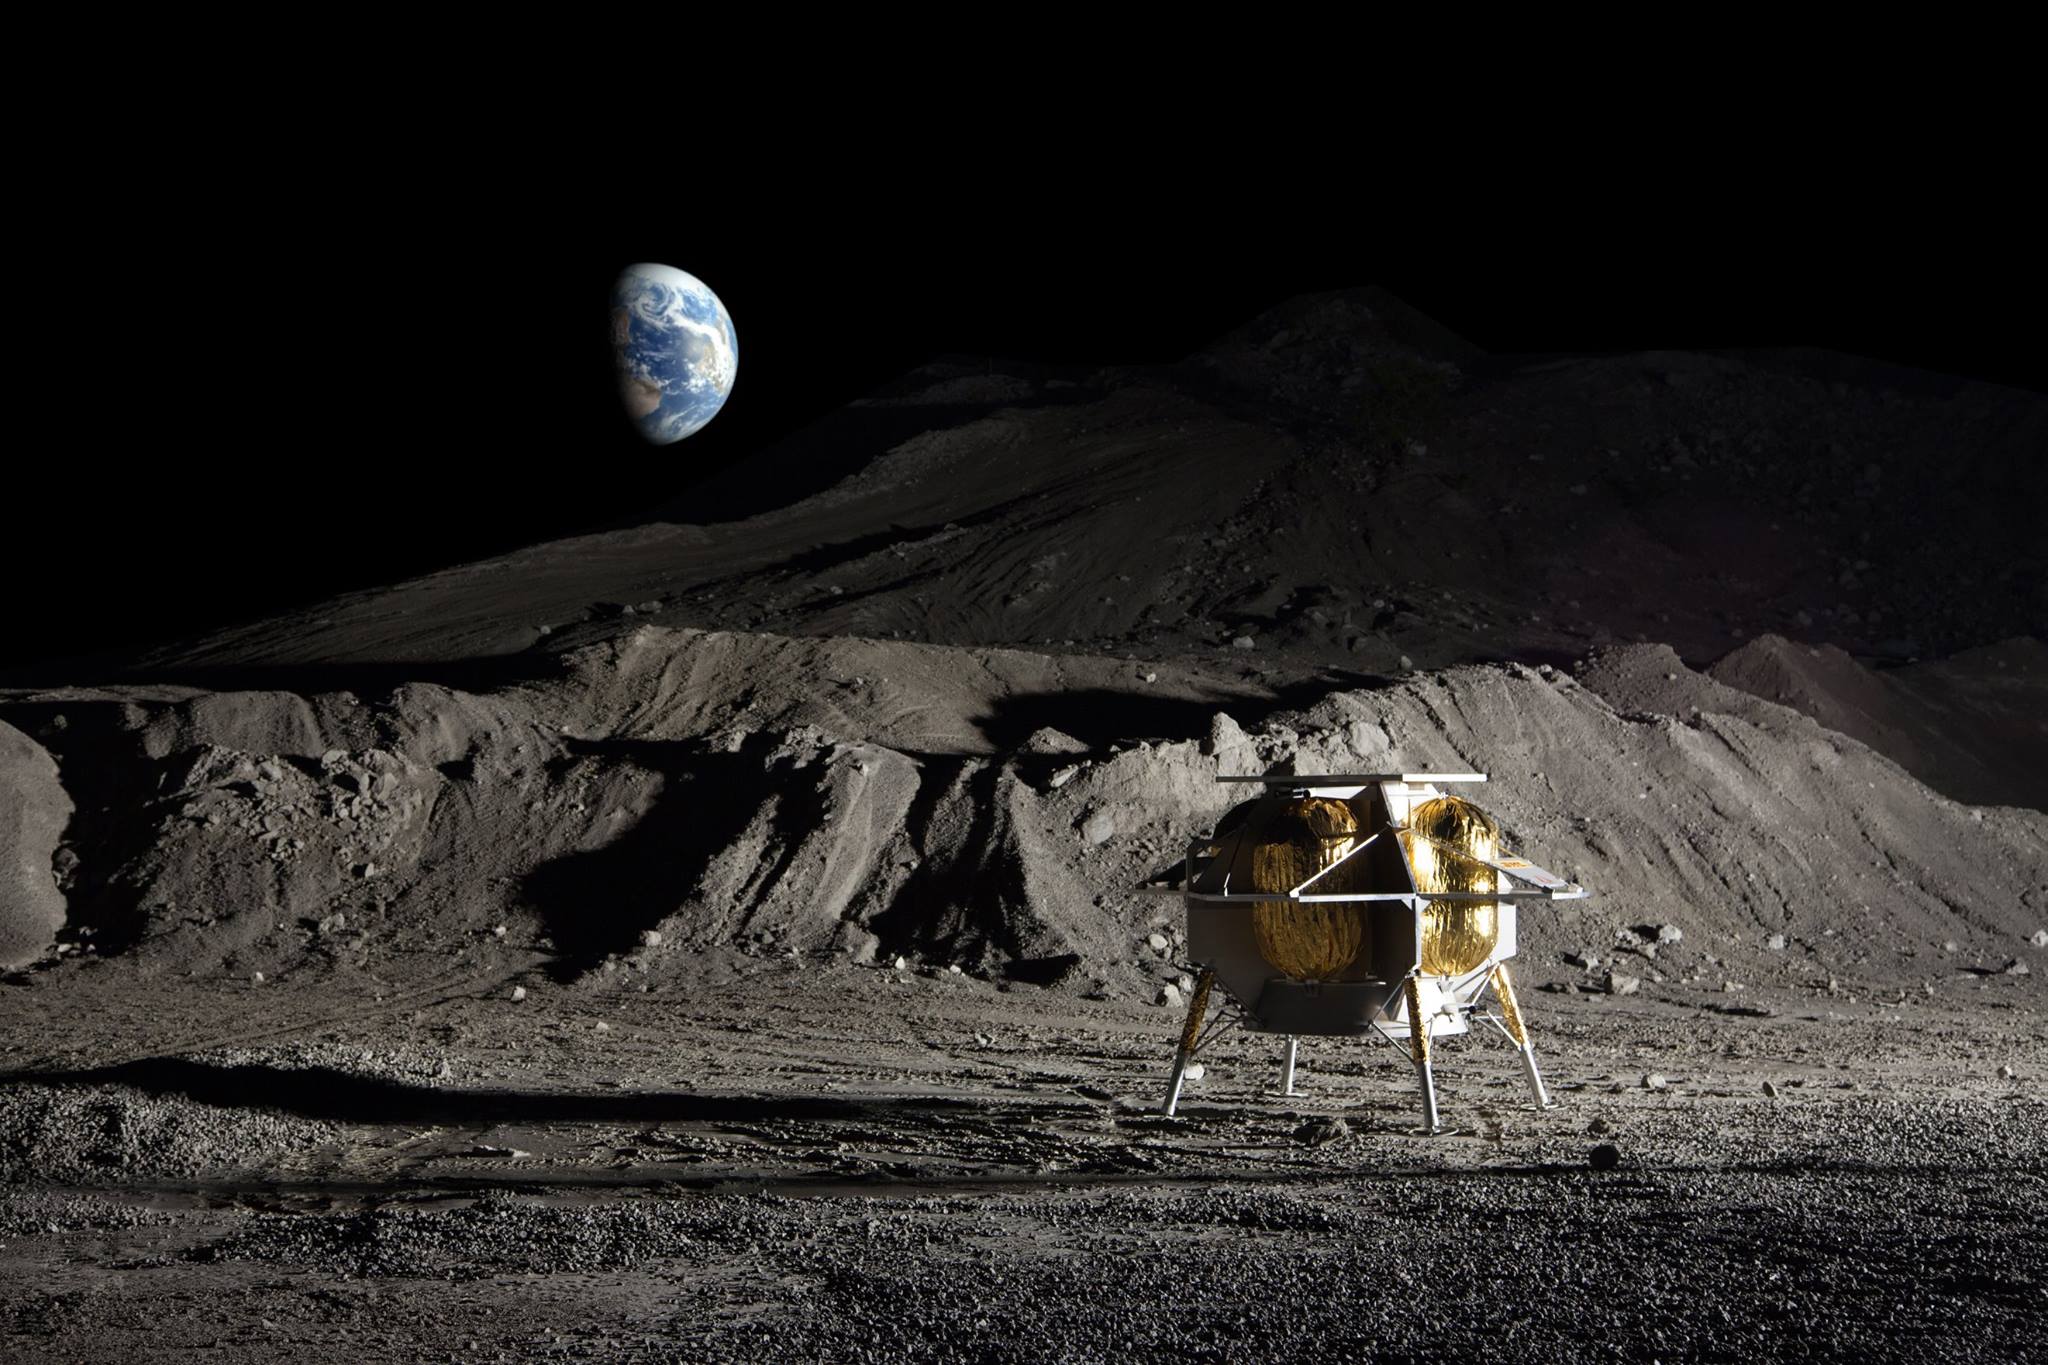 The Peregrine Lunar Lander is set to launch on Dec 24. Here’s what it’ll bring to the moon Space